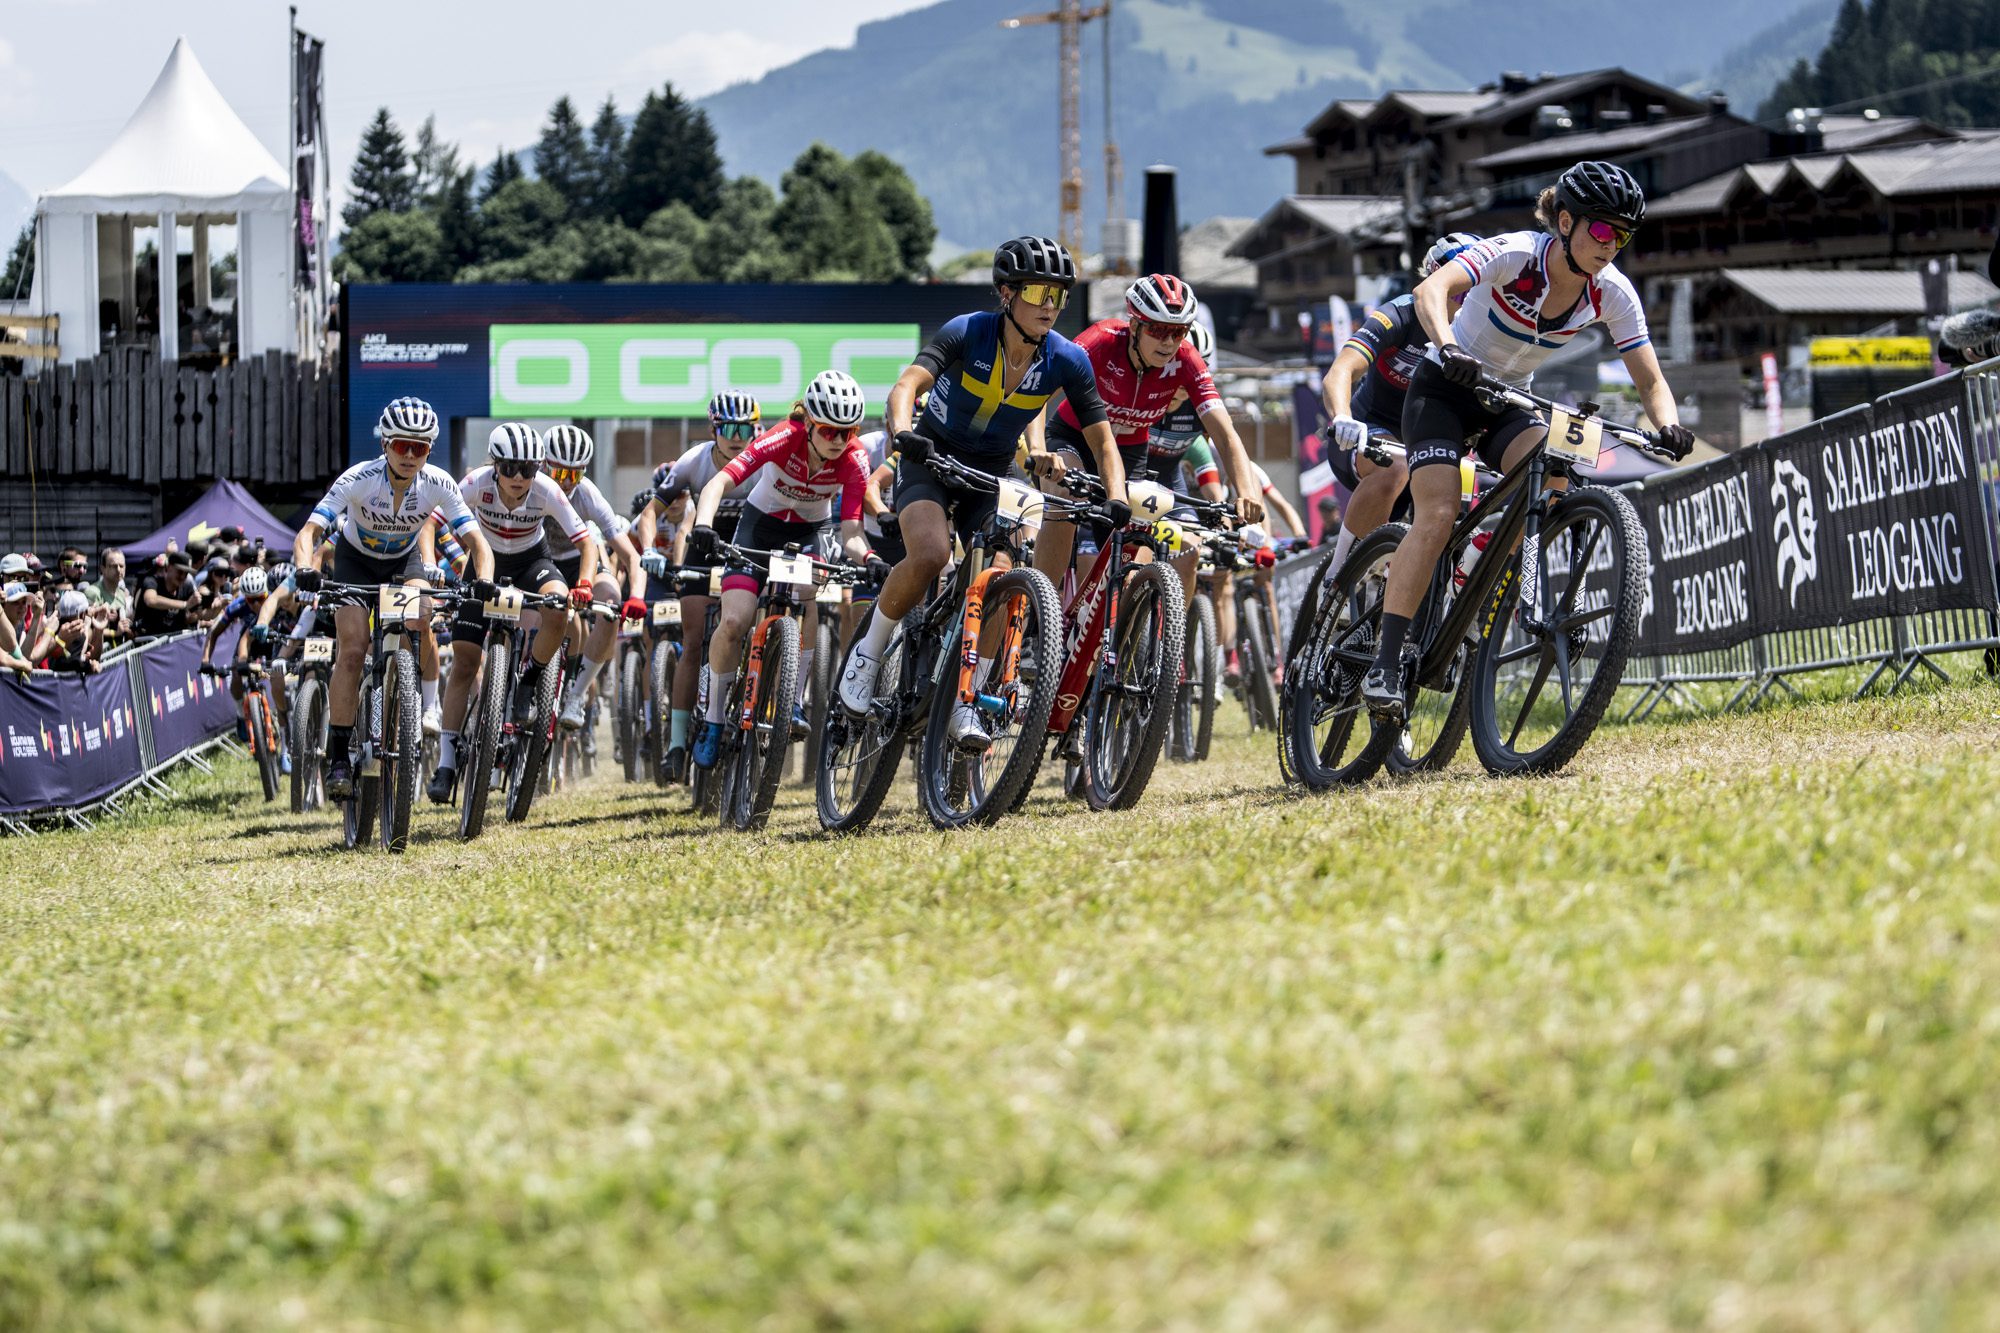 Highlights and race report: Leogang elite XCO World Cup brings the heat